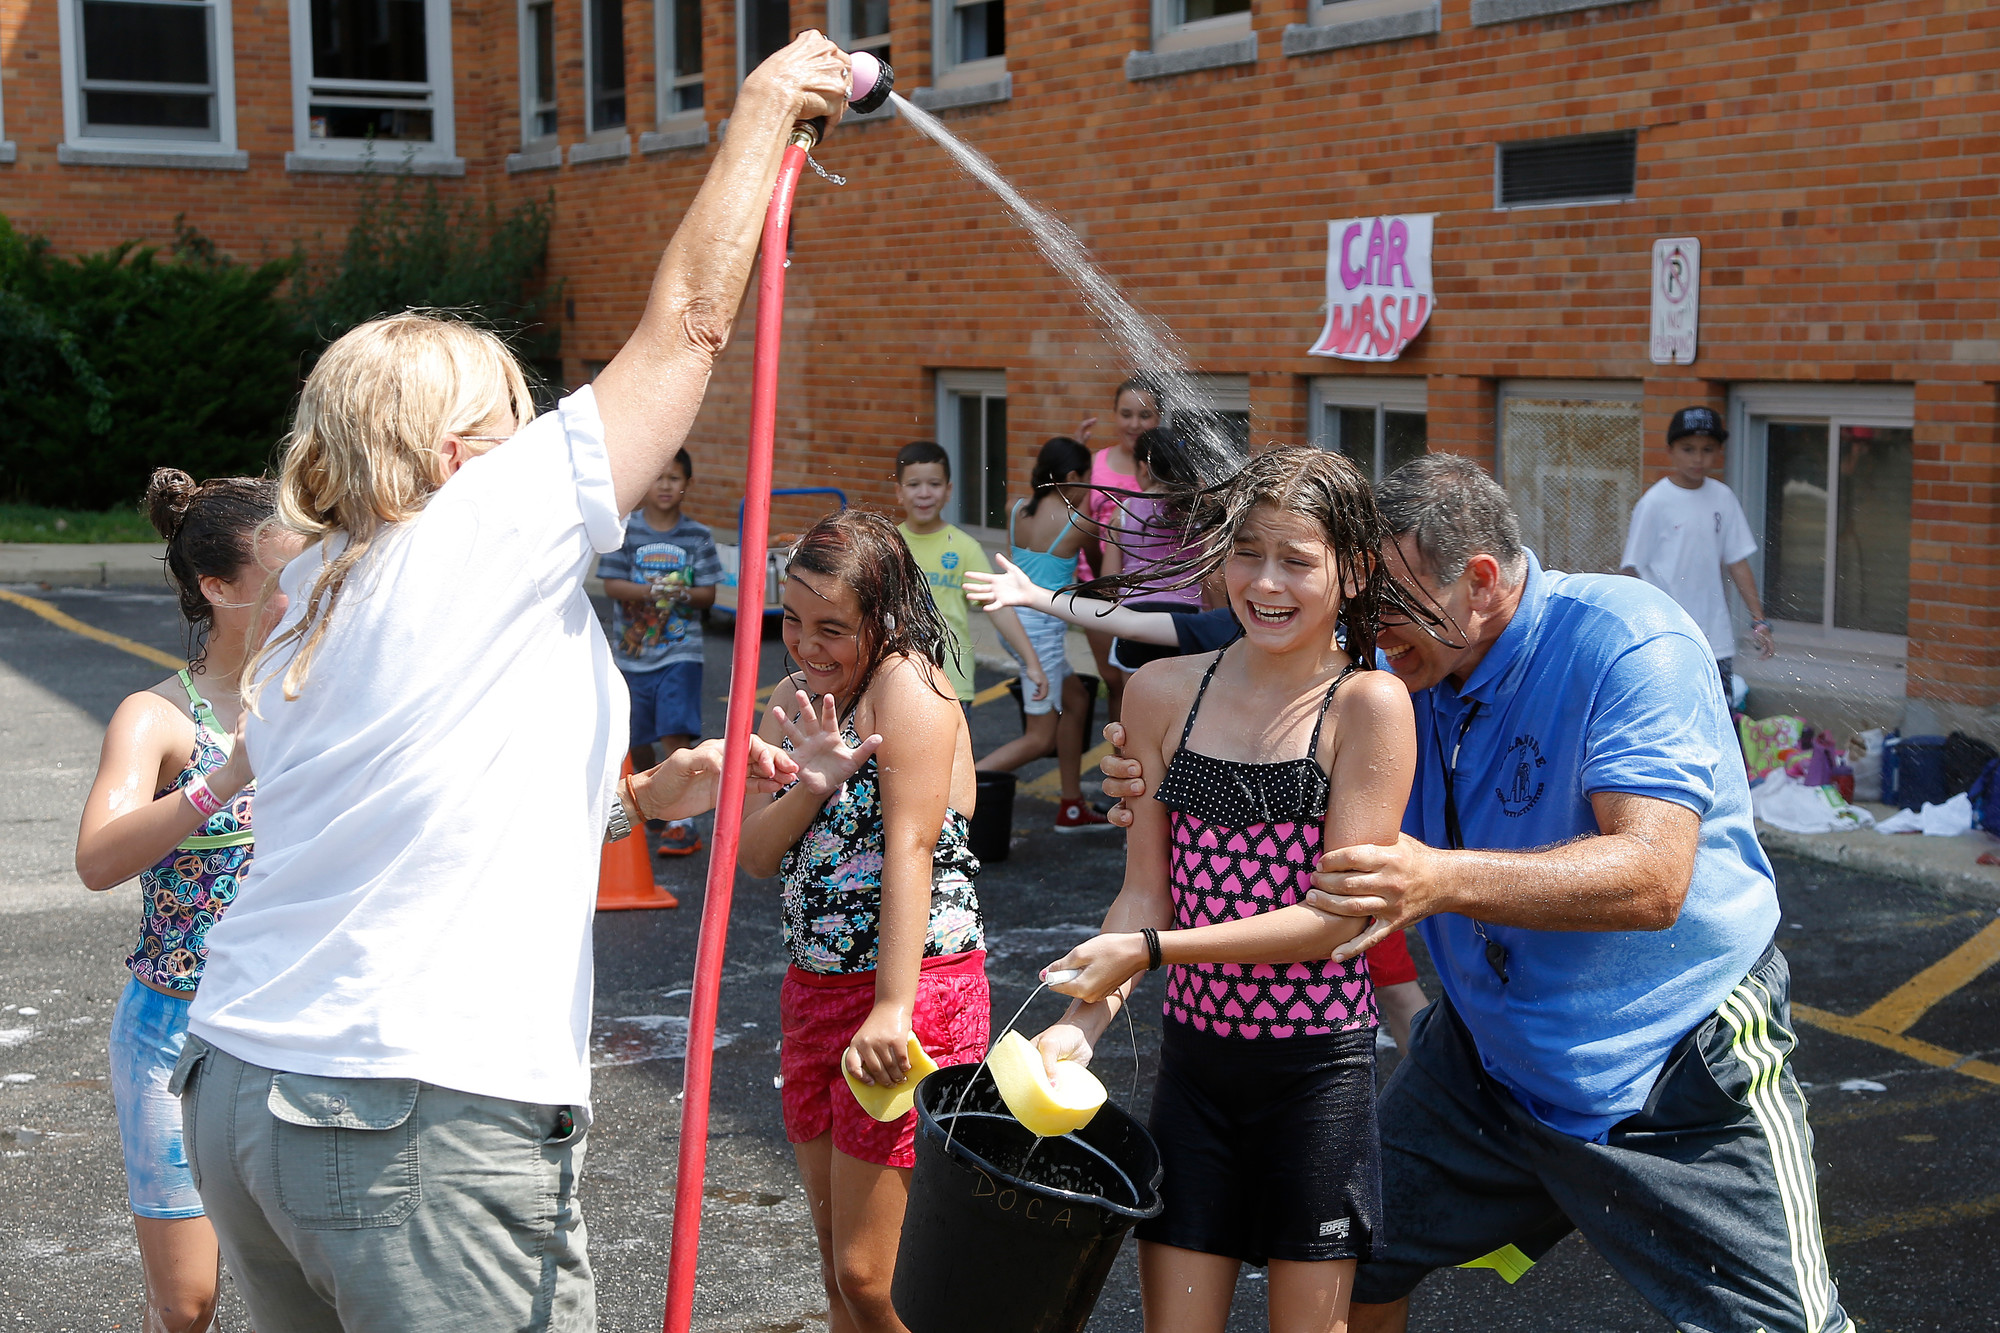 Extended Playground Camp head counselor Chris Marzo tried to avoid being soaked by camp supervisor, Nancy Baxter, as he hid behind 6th grader Eve Scarola at the camp’s fundraiser car wash.